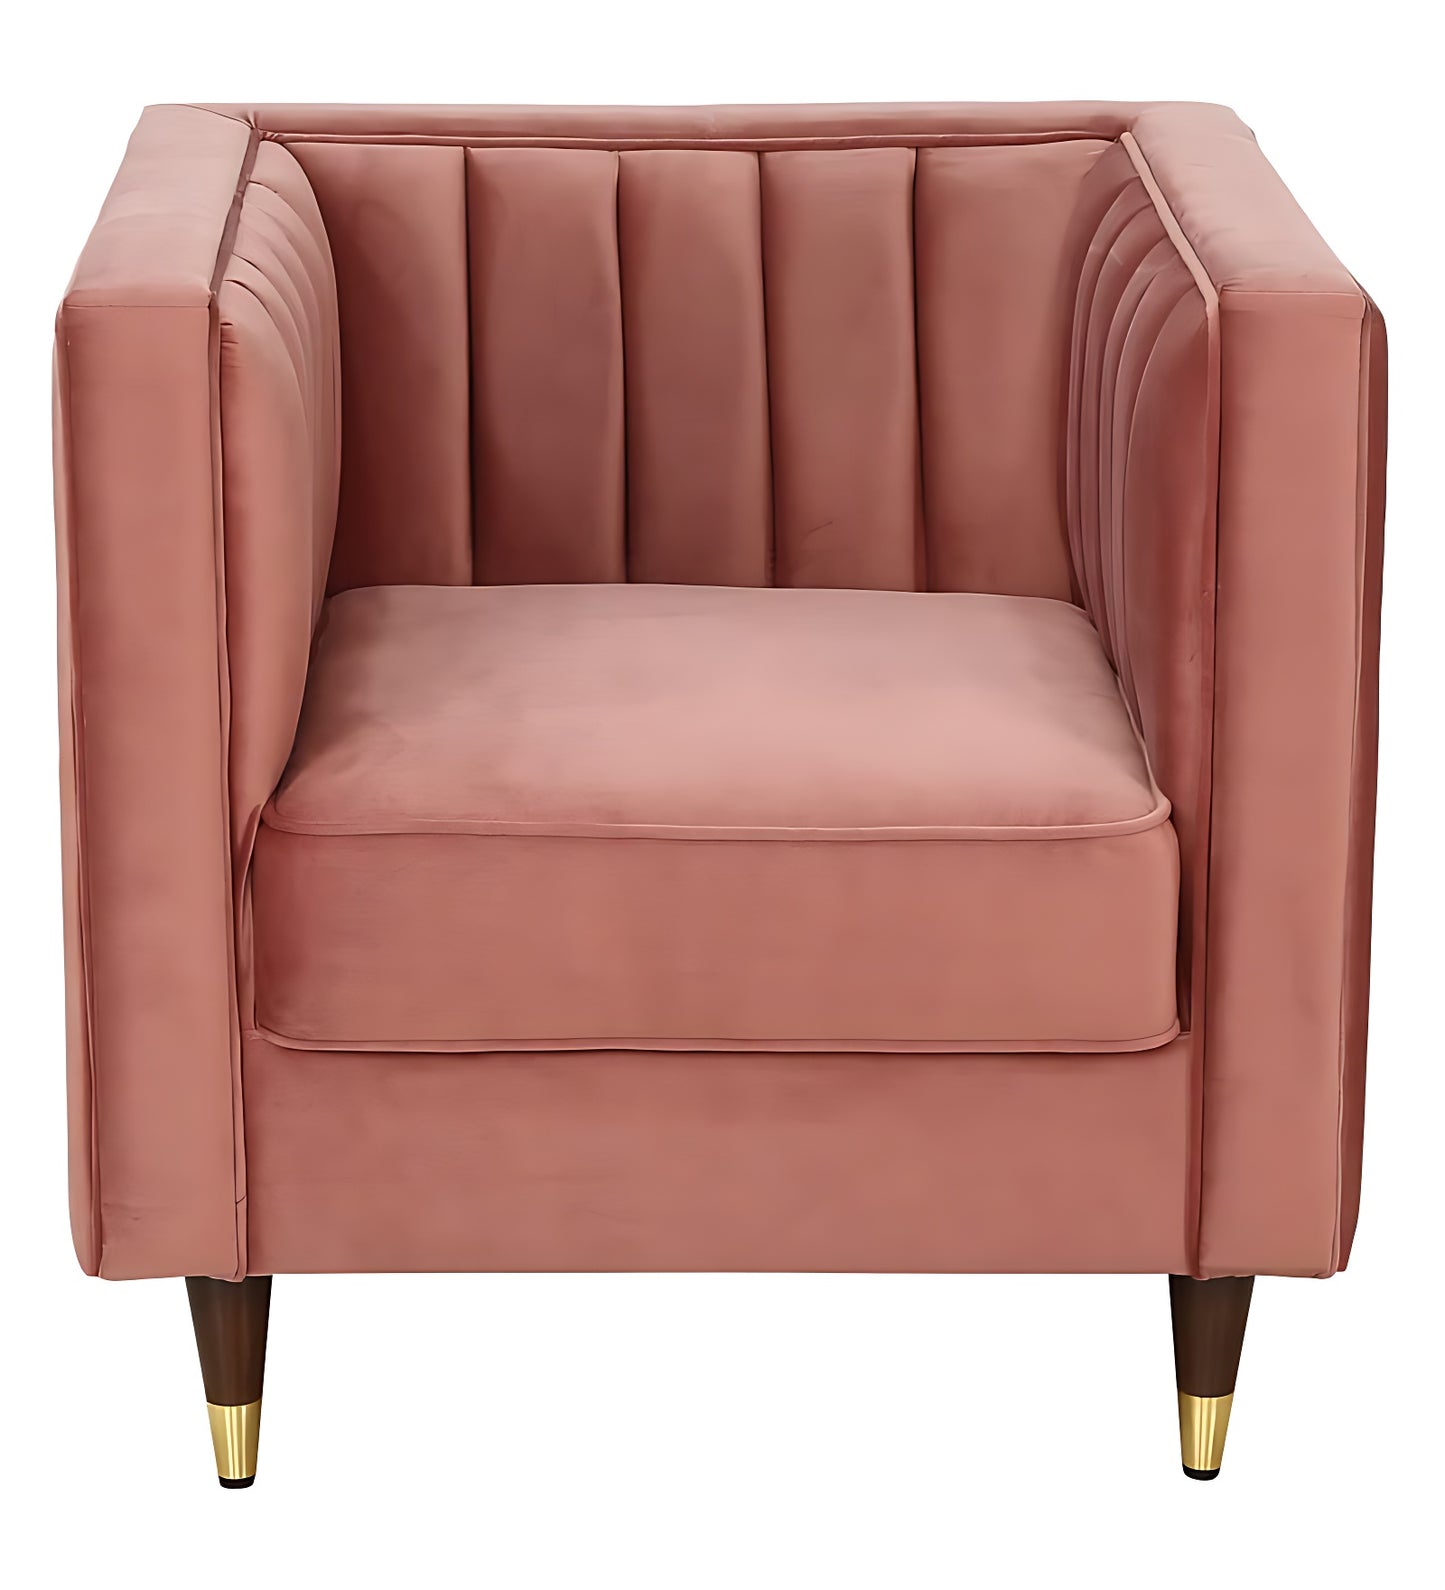 Oxtem Single Seater Fabric Sofa (Pink),Pre-Assembled)